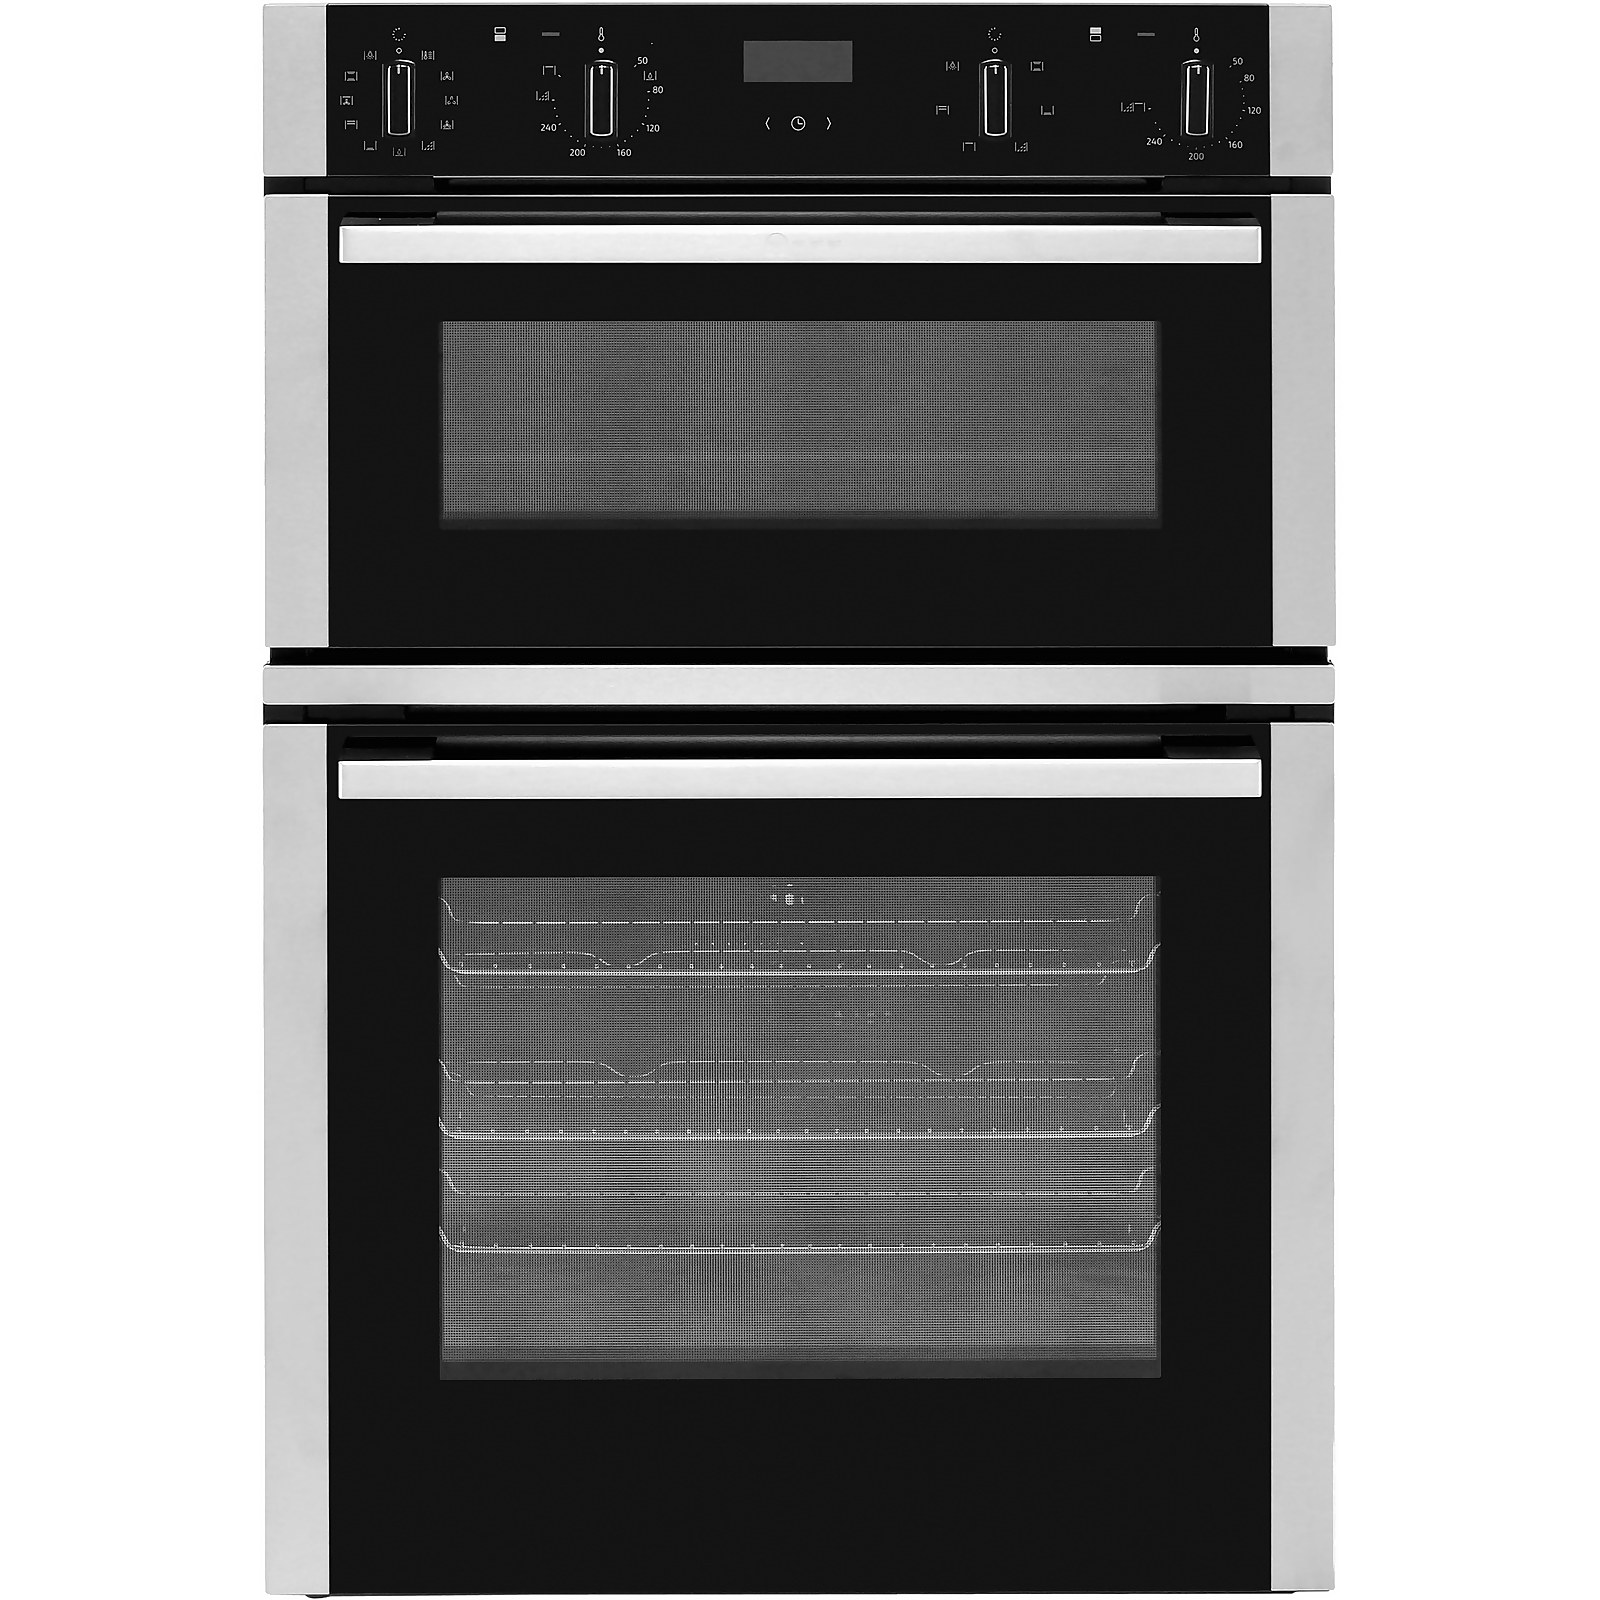 Photo of Neff N50 U1ace5hn0b Built In Electric Double Oven - Stainless Steel